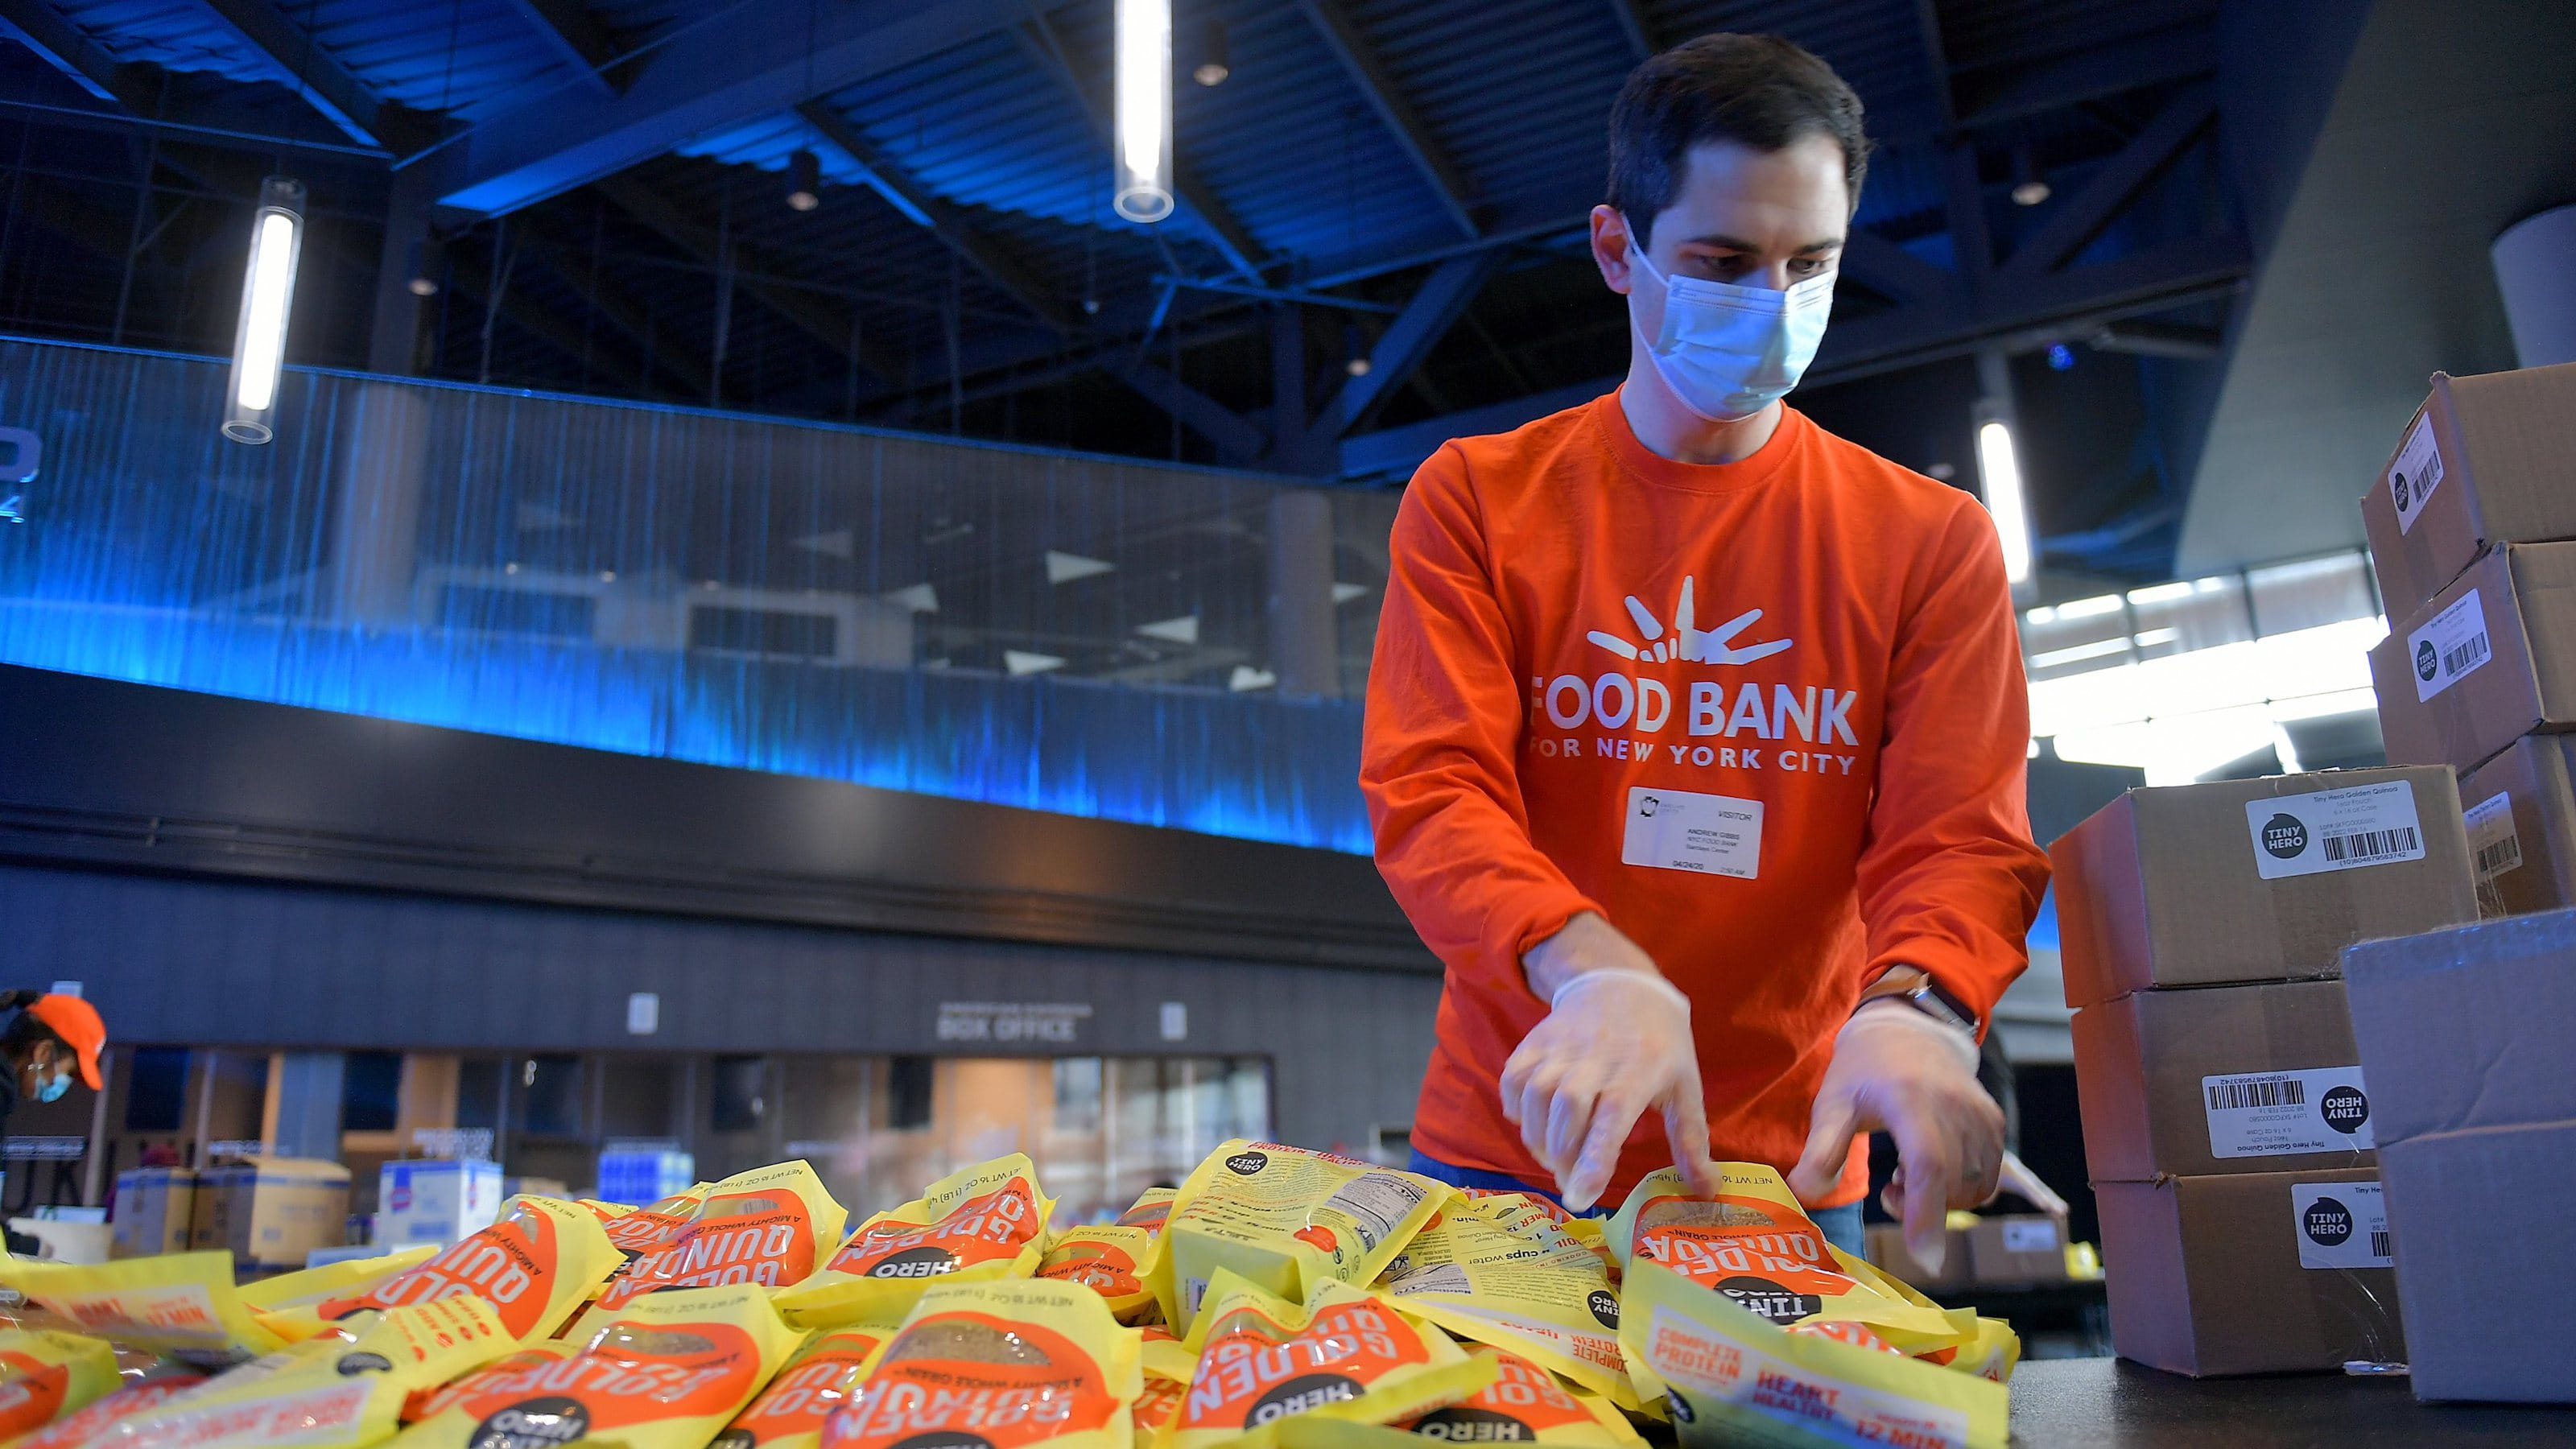 A volunteer works at the Food Bank for New York City